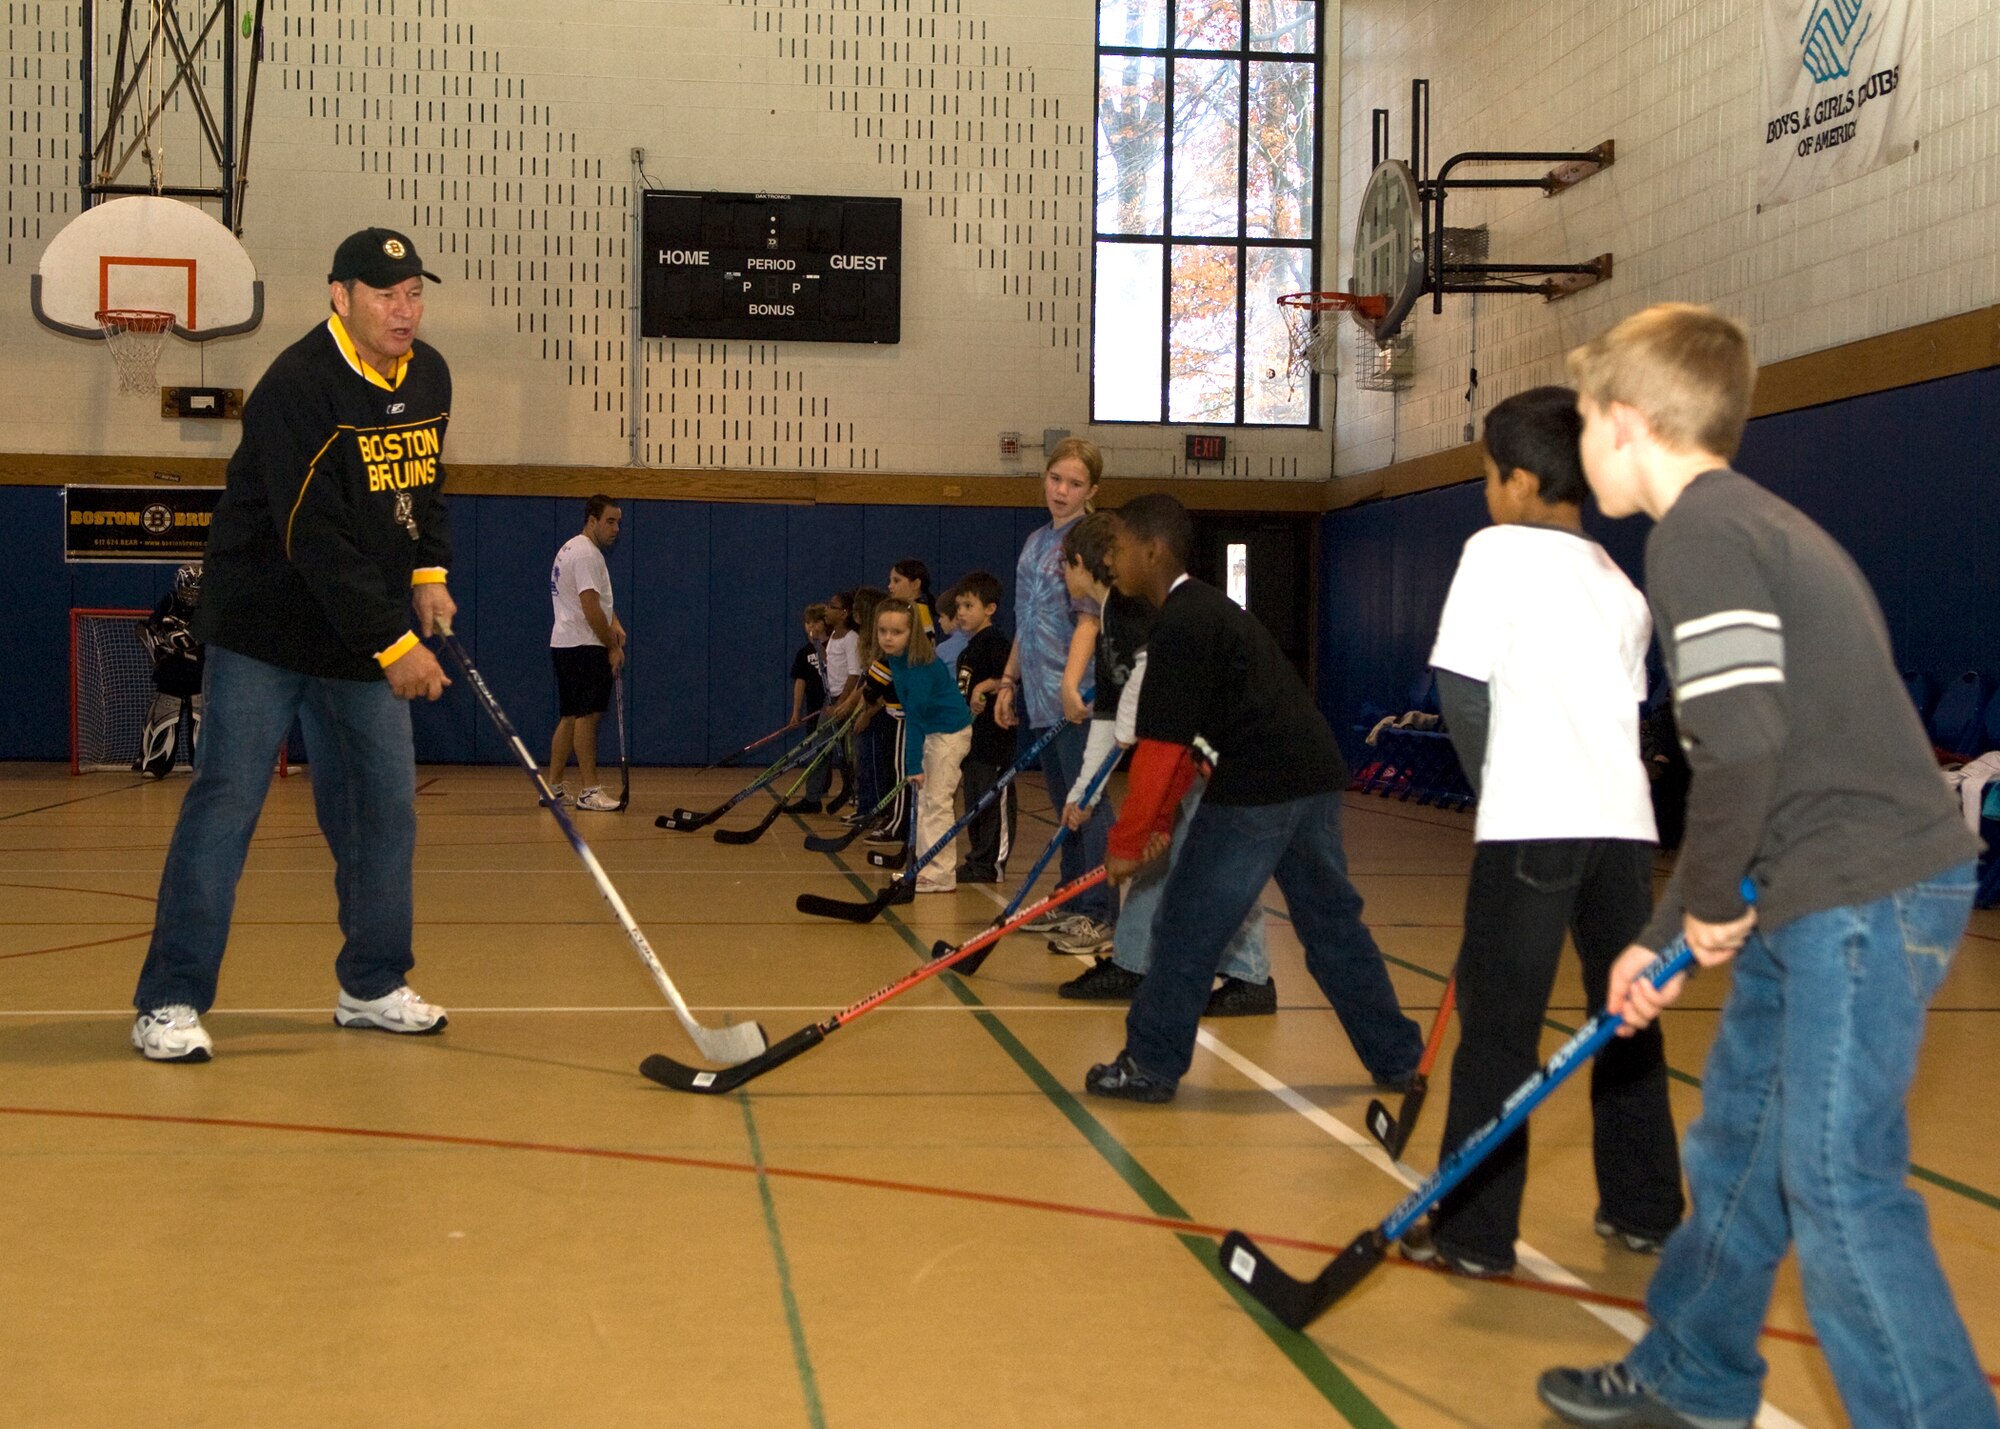 HANSCOM AIR FORCE BASE, Mass. – Boston Bruins alumnus Tommy Songin shows Hanscom children some fundamental stick maneuvers during an Air Force Family Week street hockey event at the Hanscom Youth Center, Nov. 4, sponsored by the Boston Bruins. Bruins staff led Hanscom children through a number of street hockey drills focusing on the fundamentals of play. The Bruins donated all of the street hockey equipment to Hanscom’s Youth Center so children could continue to enjoy the game. (U.S. Air Force photo by Walter Santos)